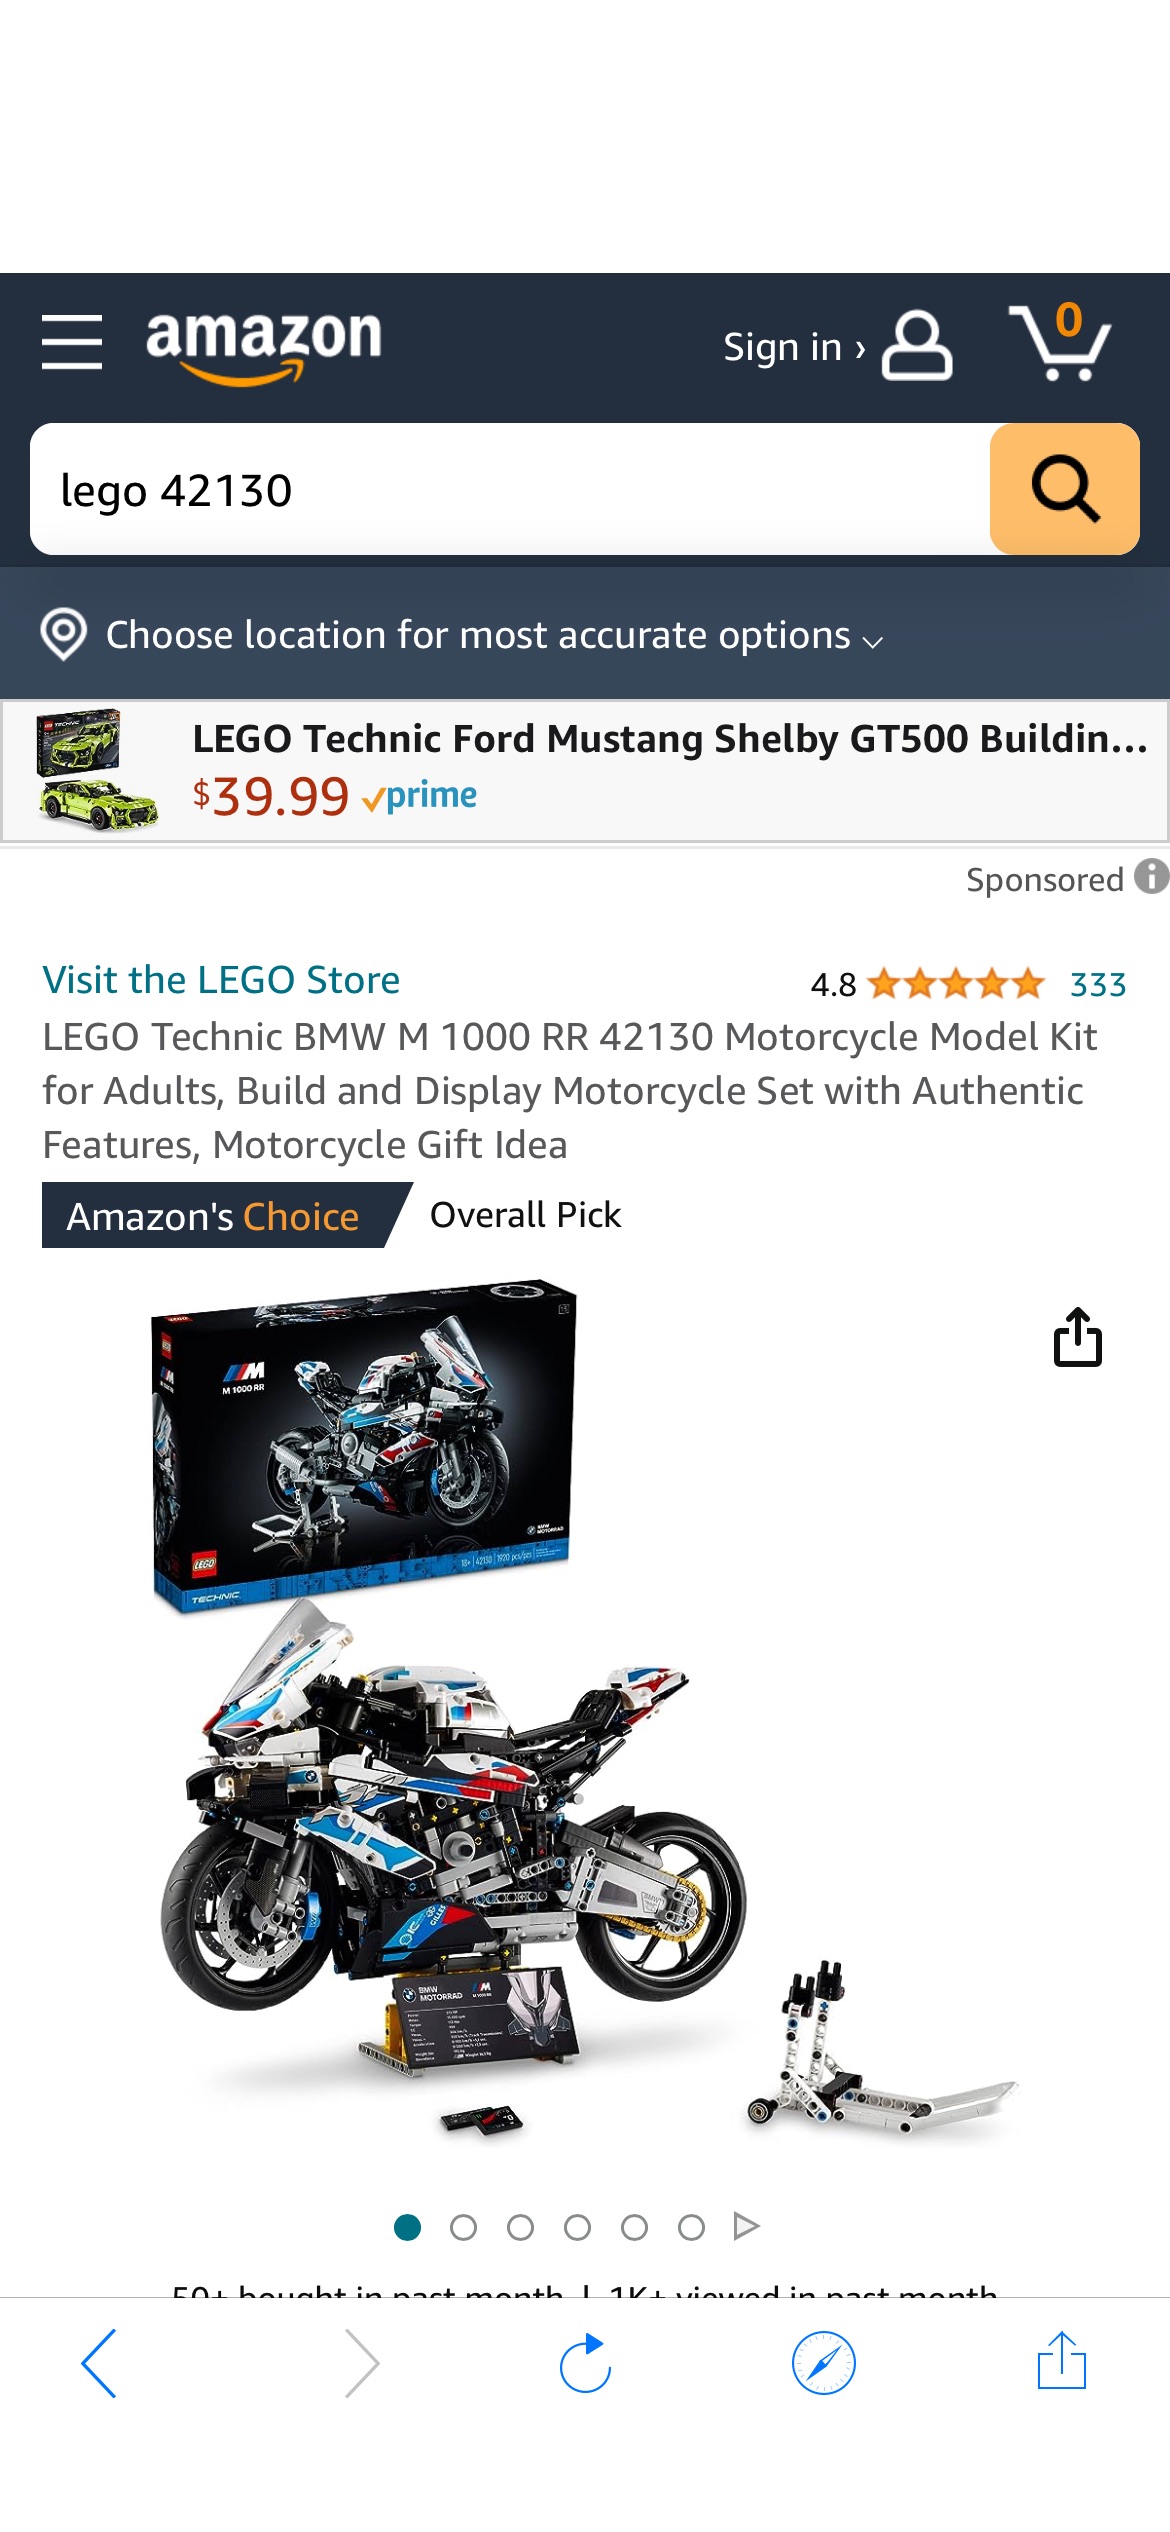 Amazon.com: LEGO Technic BMW M 1000 RR 42130 Motorcycle Model Kit for Adults, Build and Display Motorcycle Set with Authentic Features, Motorcycle Gift Idea : Toys & Games